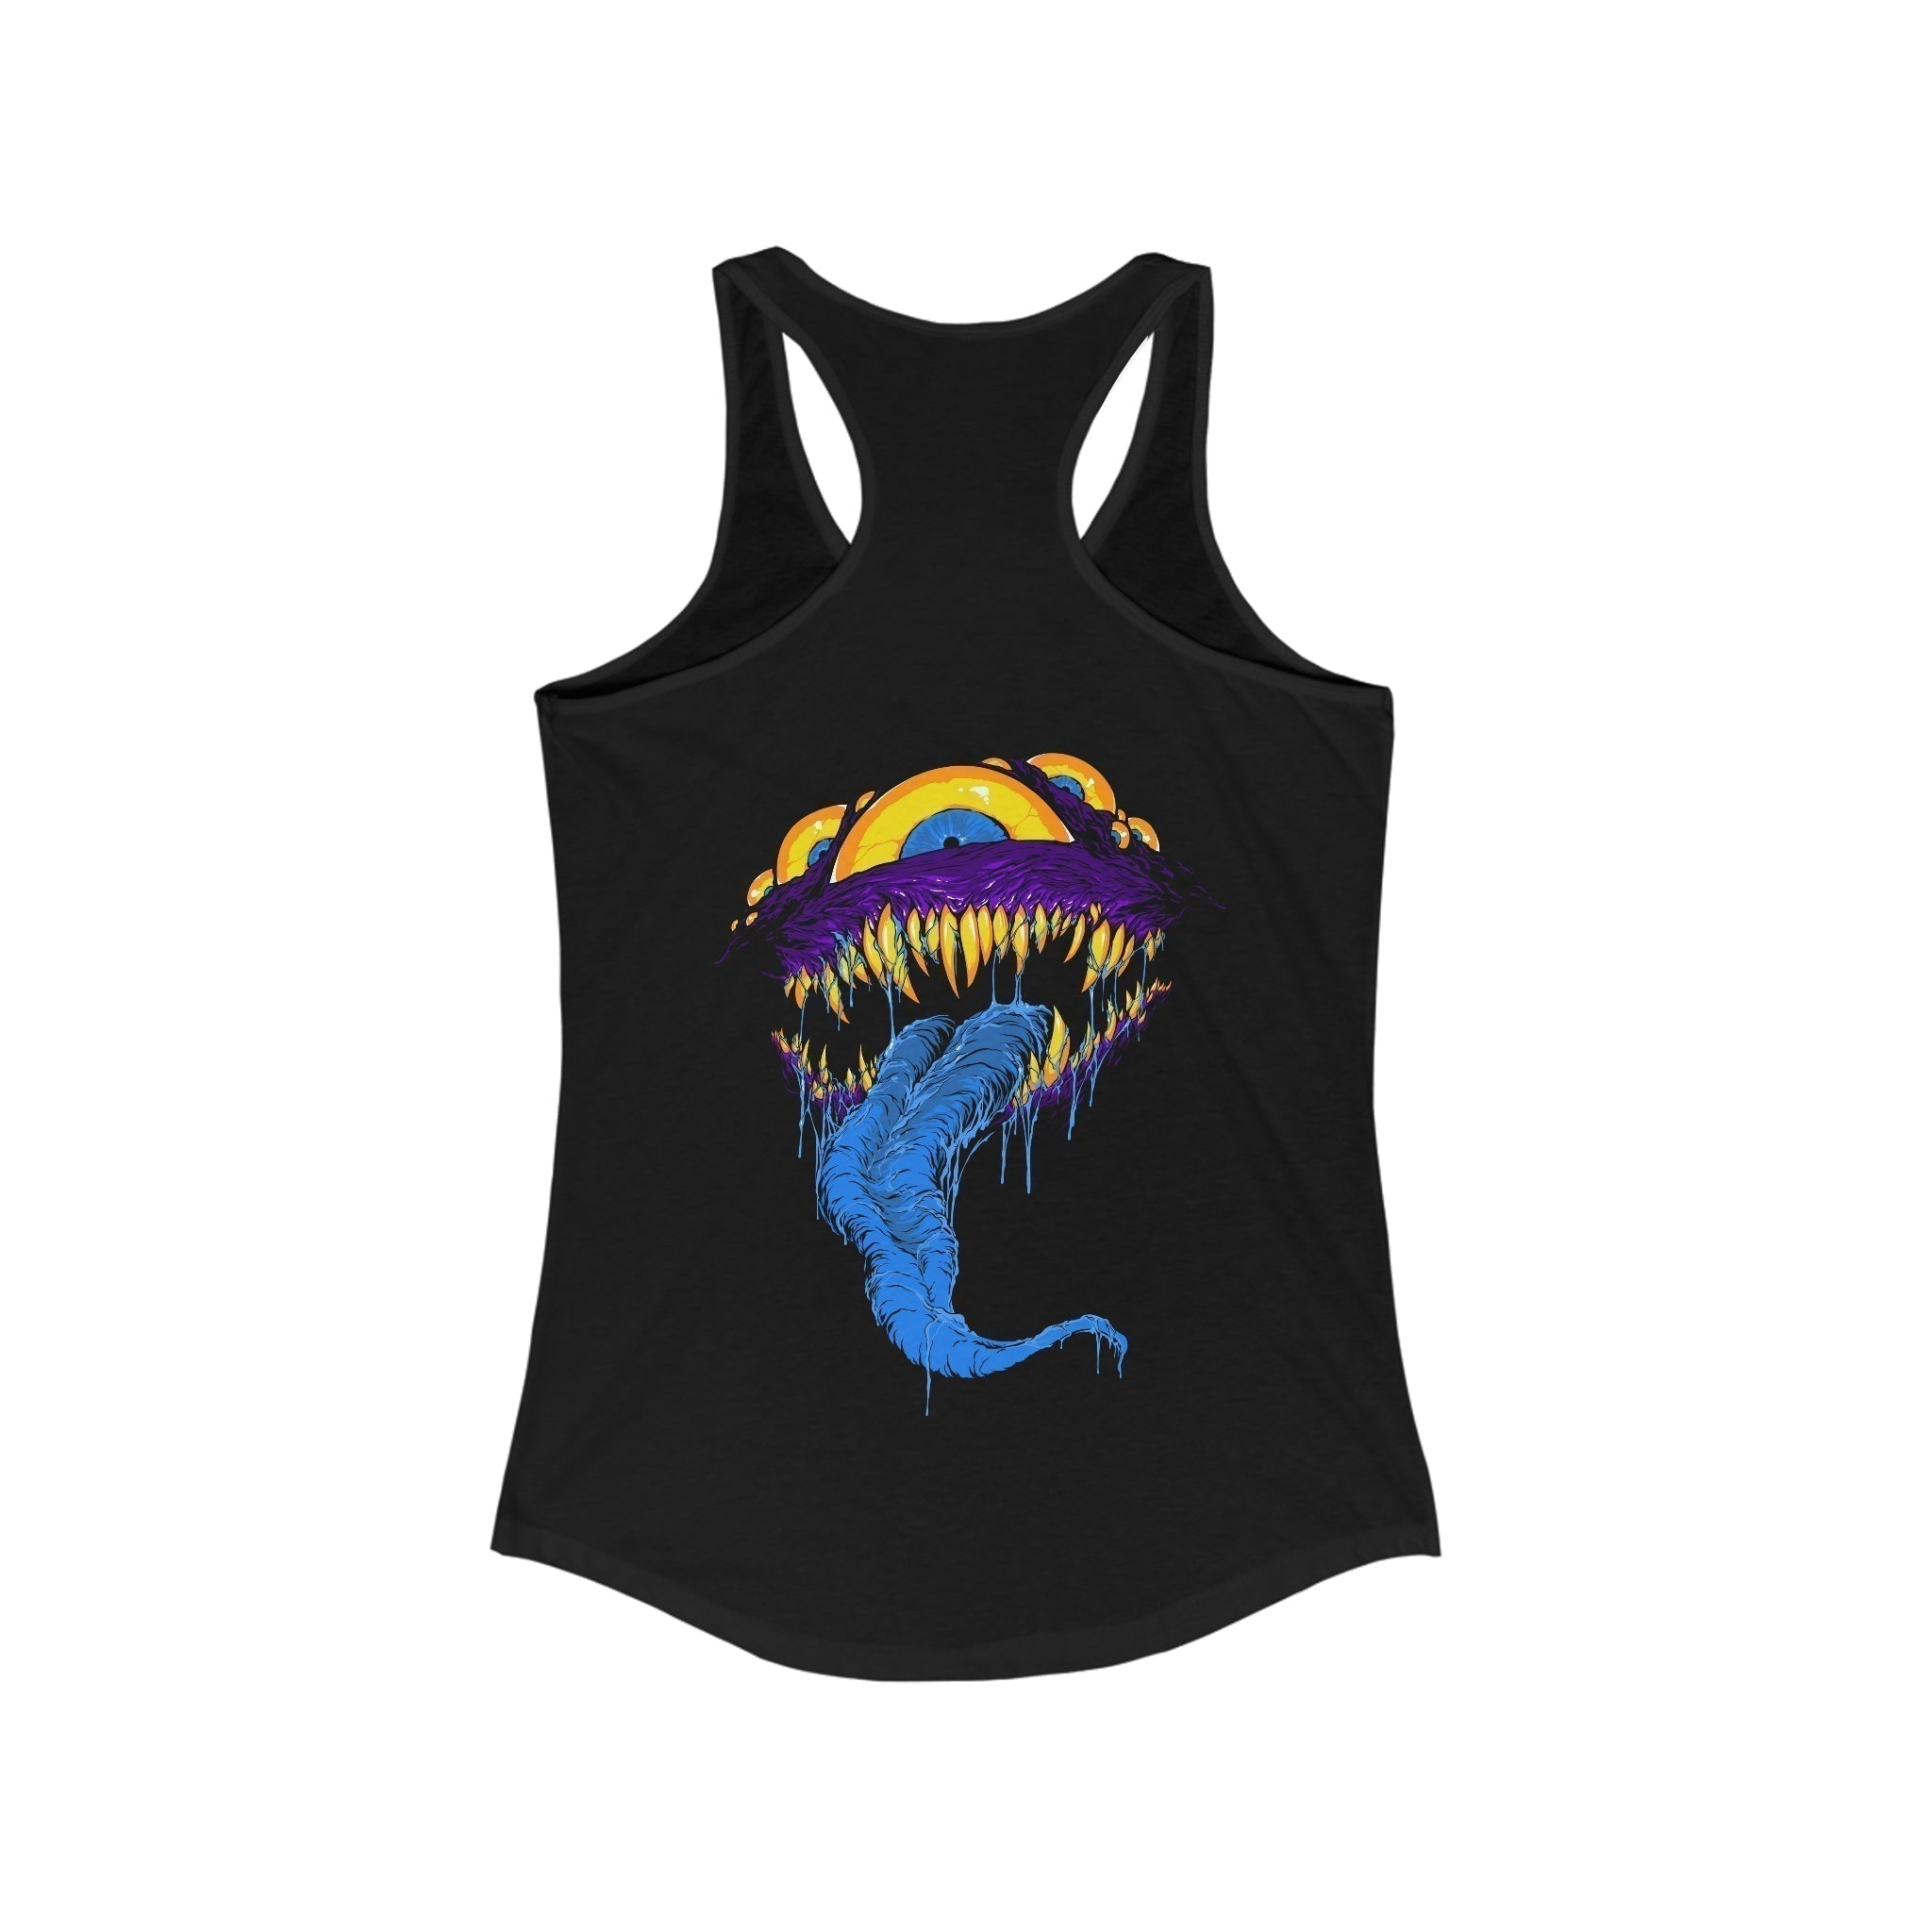 Mimic - Norse Foundry Women's Tank Top - 25277747956031798284